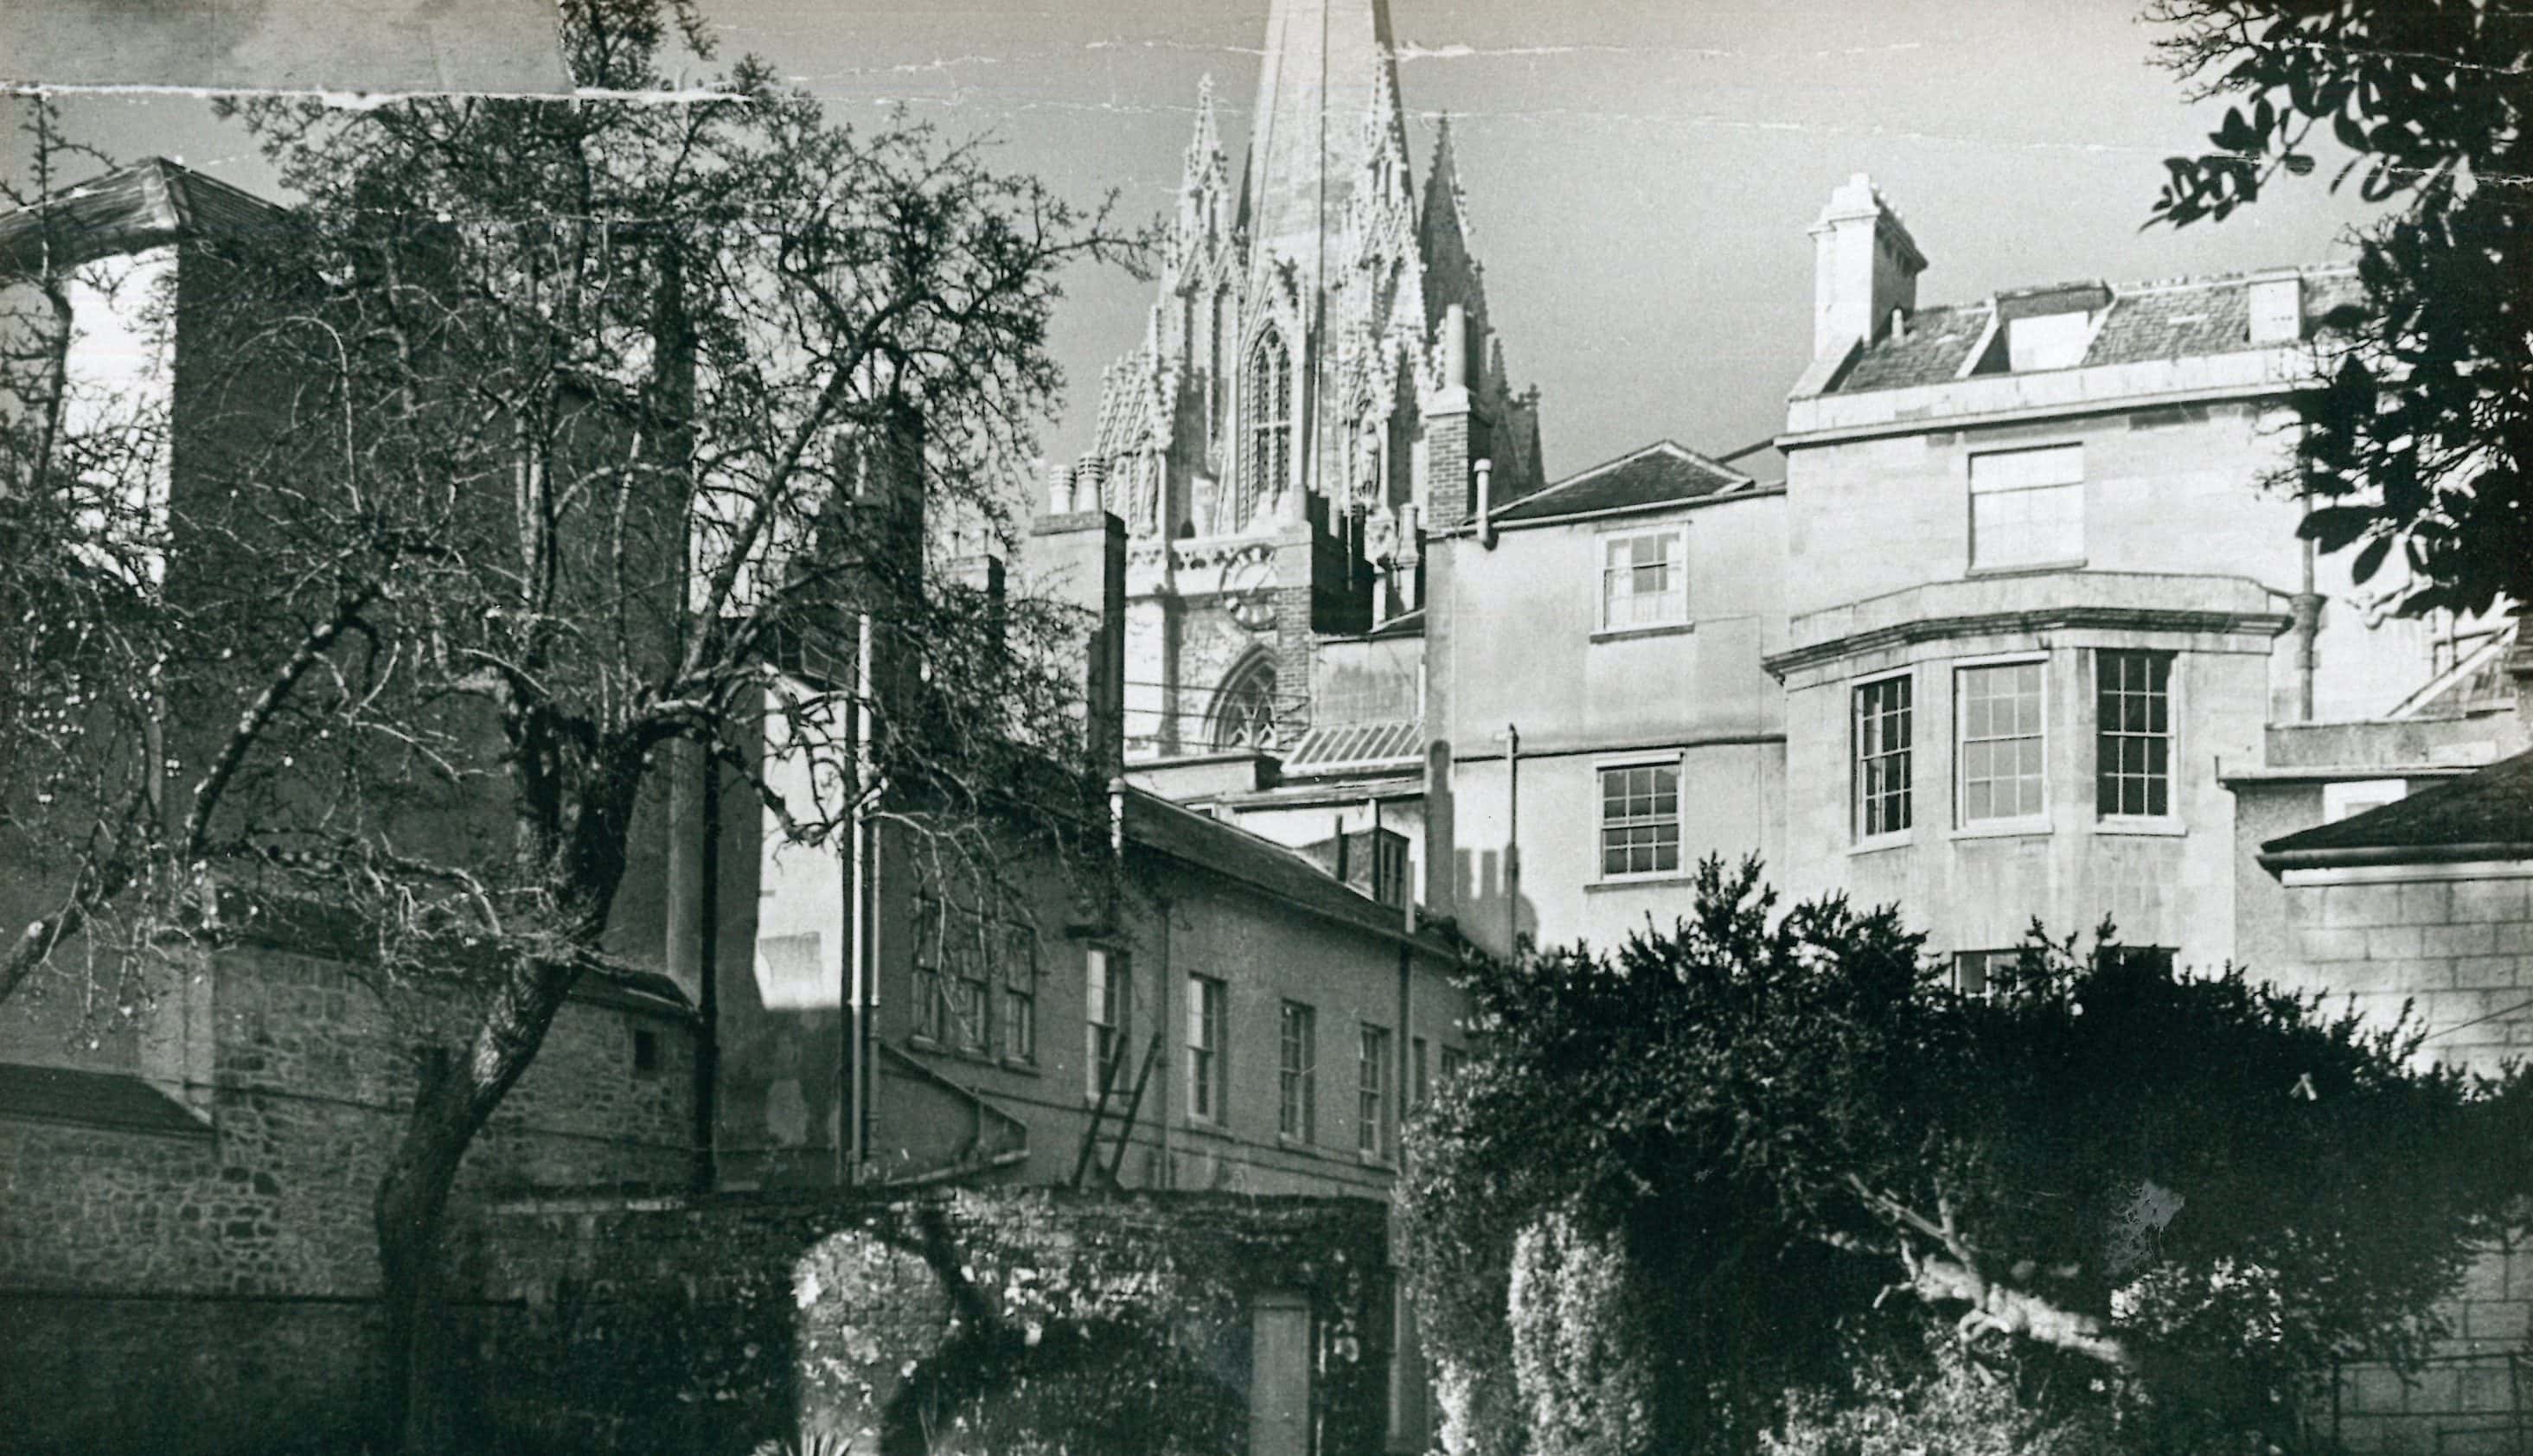 History-17-Oxford-Old-Bank-Hotel-View-of-St-Marys-Spire-from-Parking-Web-Hero-aspect-ratio-2929-1684